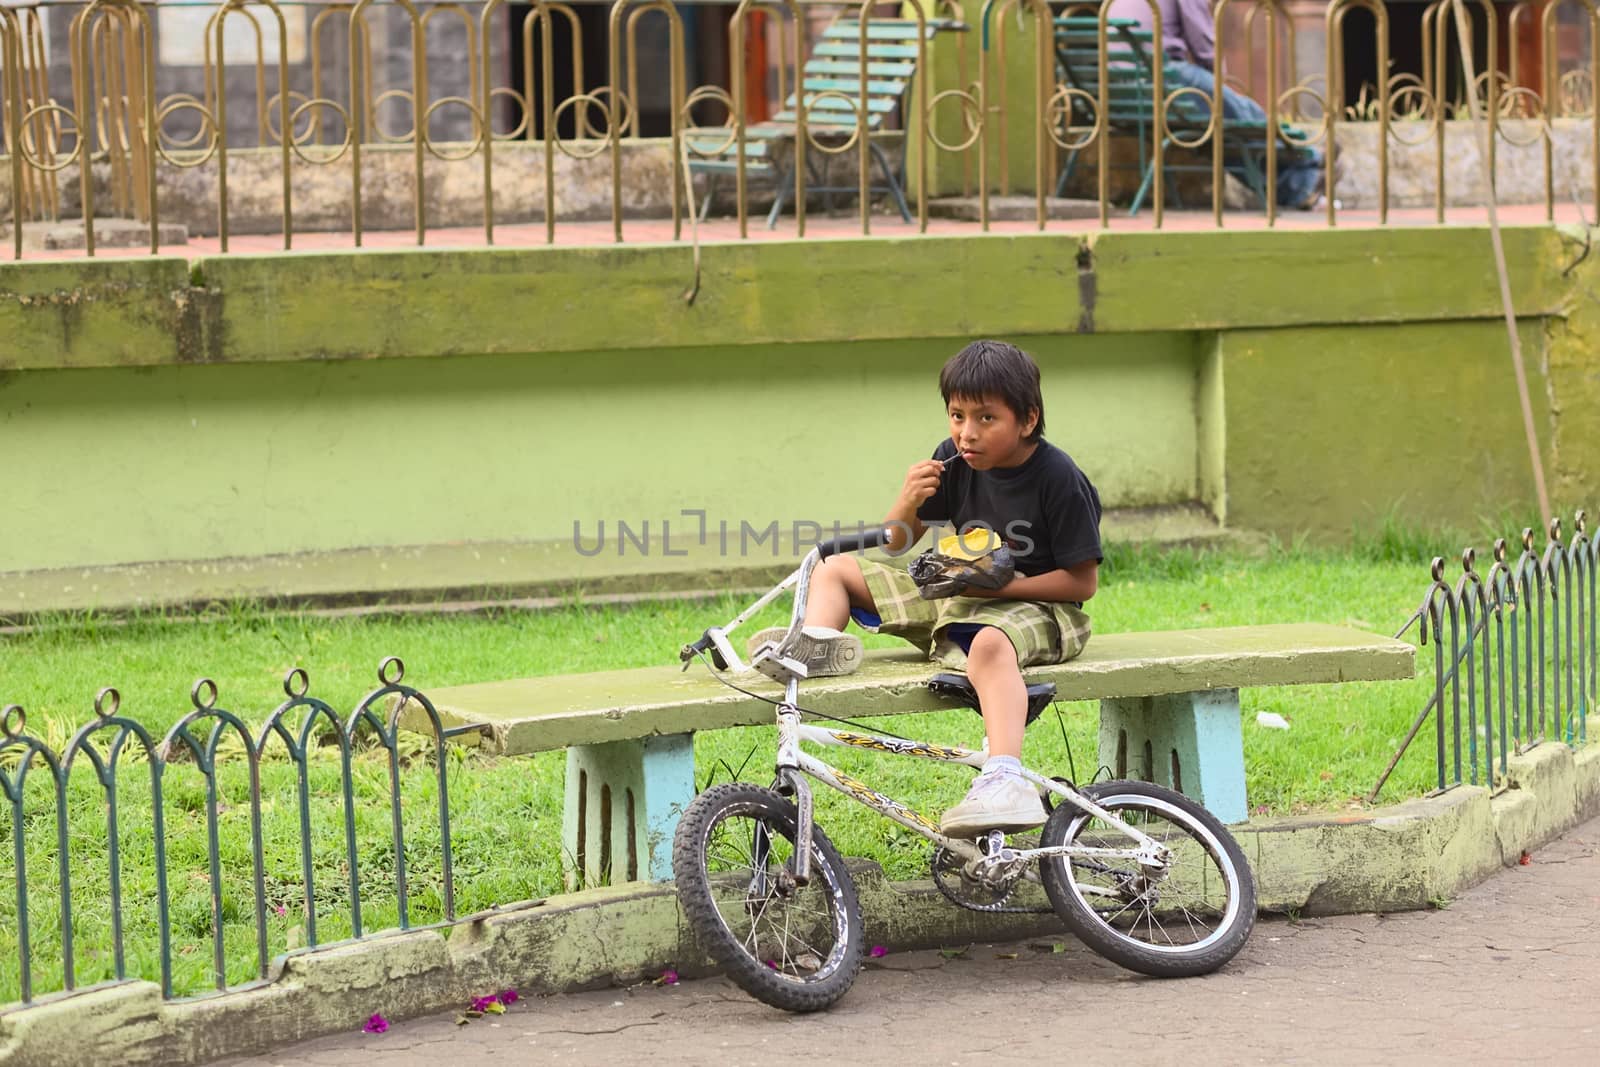 BANOS, ECUADOR - FEBRUARY 22, 2014: Unidentified boy with bike eating a snack while sitting on a bench in Sebastian Acosta Park on February 22, 2014 in Banos, Ecuador. 